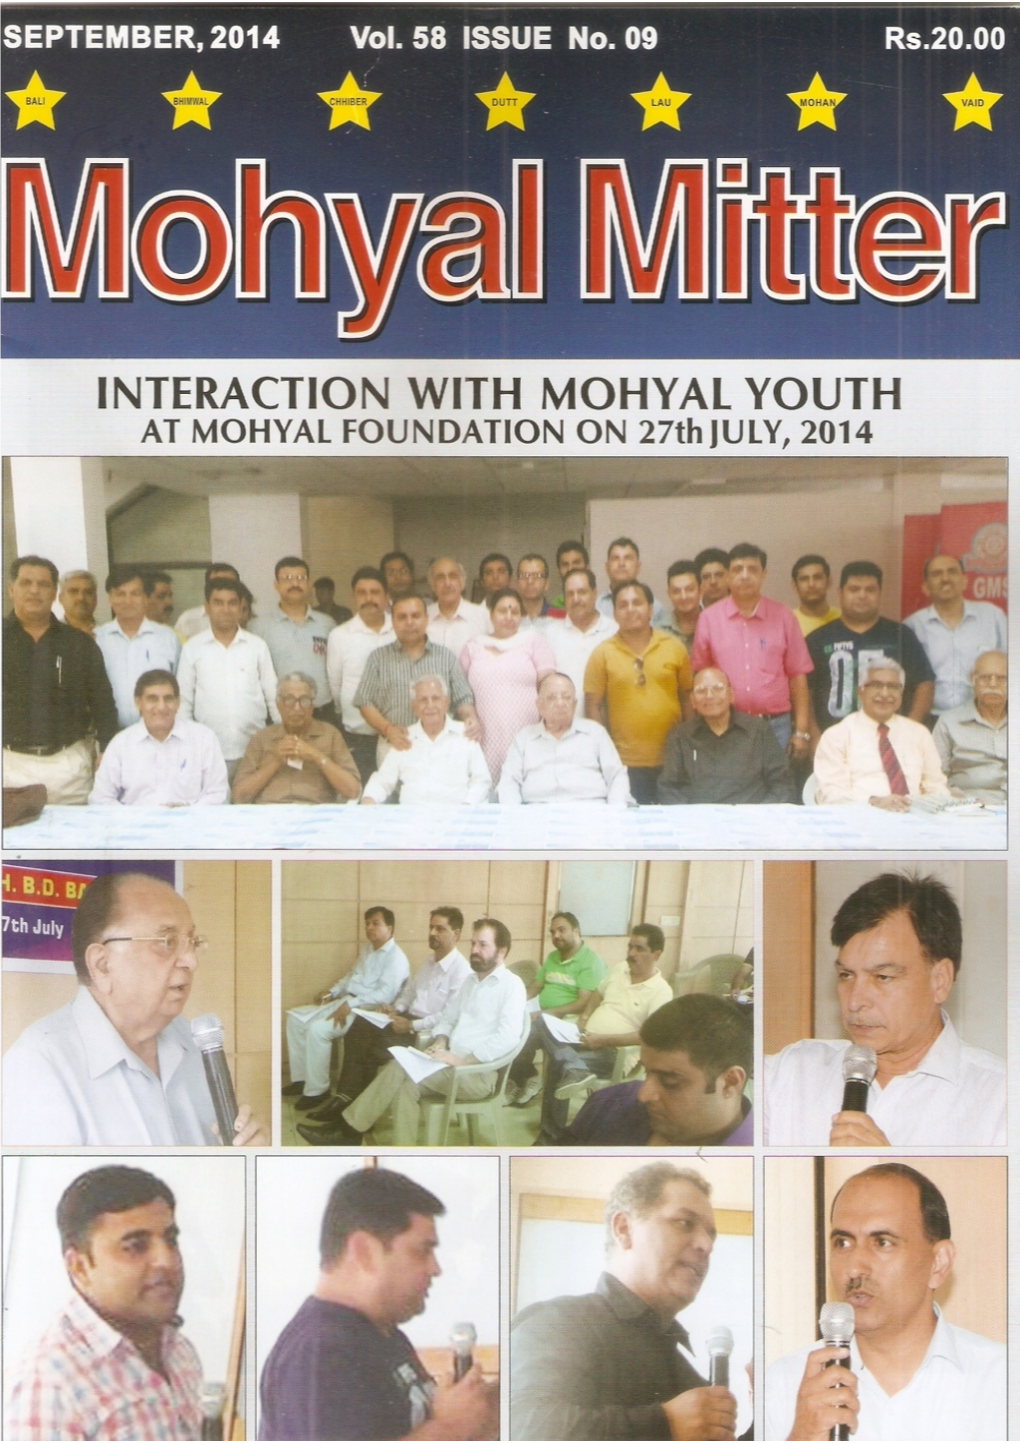 Mohyal Mitter Foundation New Delhi, on 27 July 2014